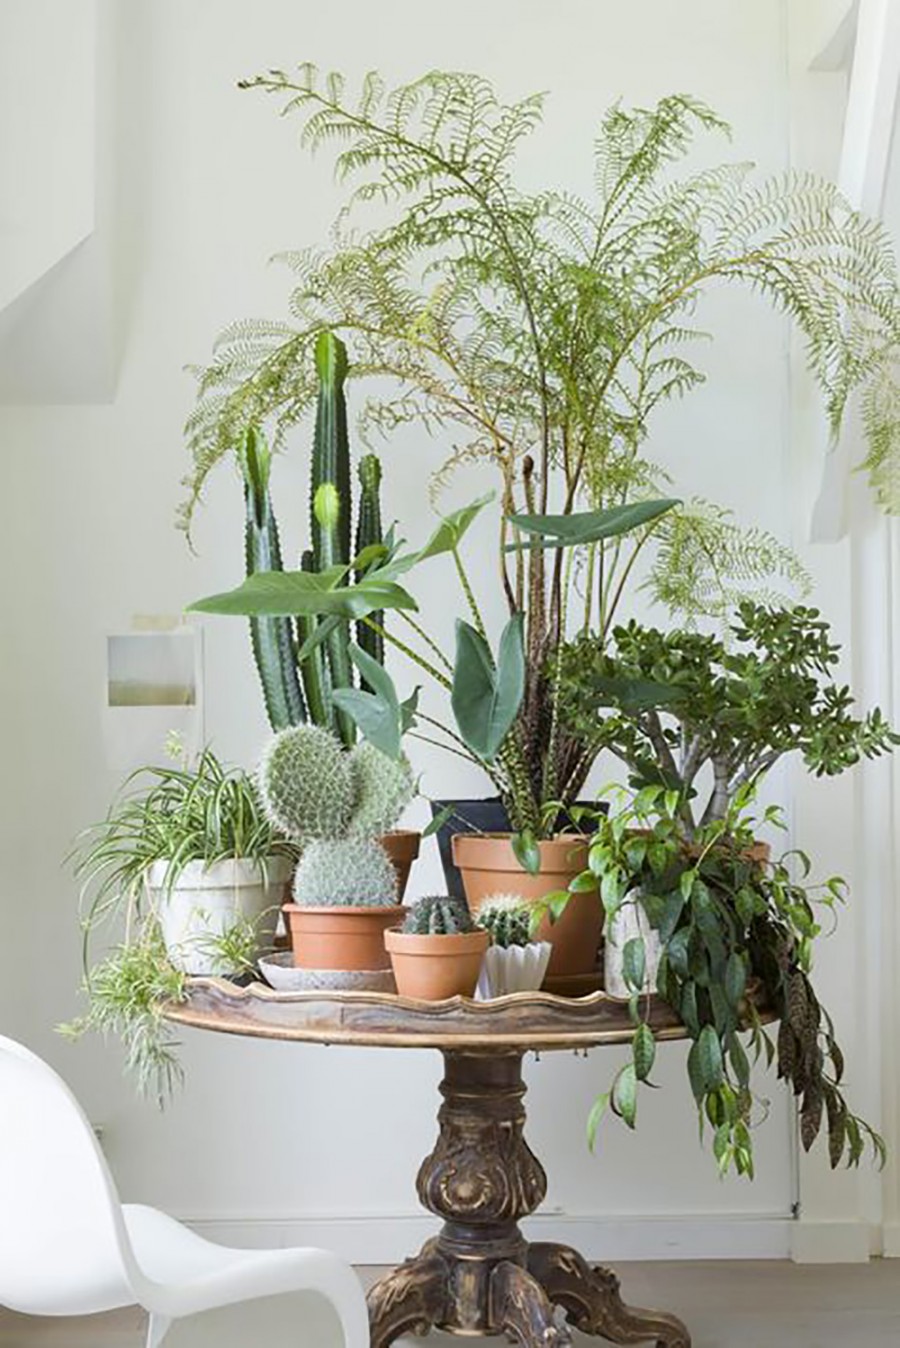 10 HAPPY LIVING ROOM IDEAS WITH PLANTS